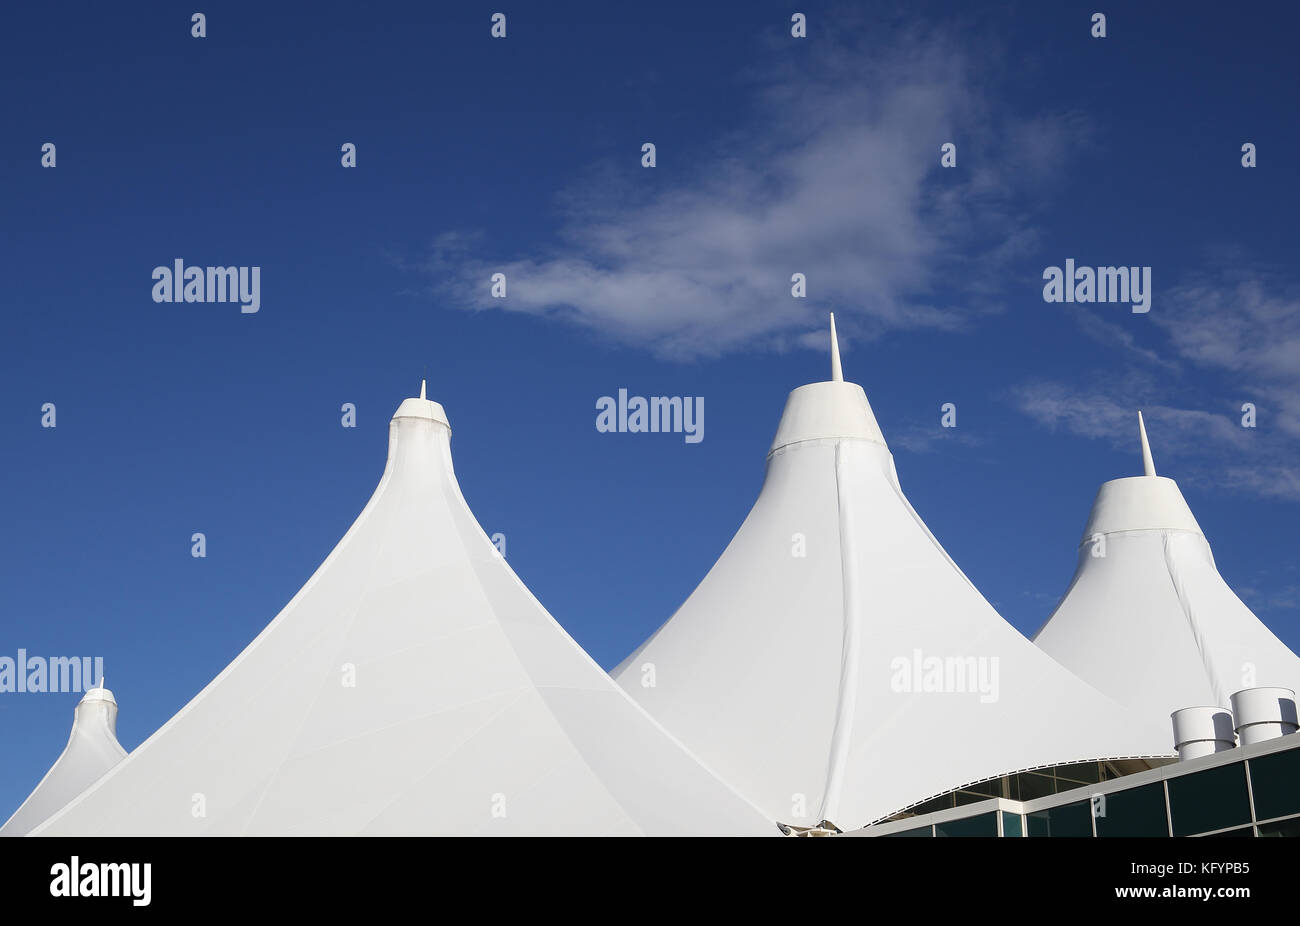 The Teflon-coated fiberglass roof of Denver International Airport resembles the Rocky Mountains. Stock Photo